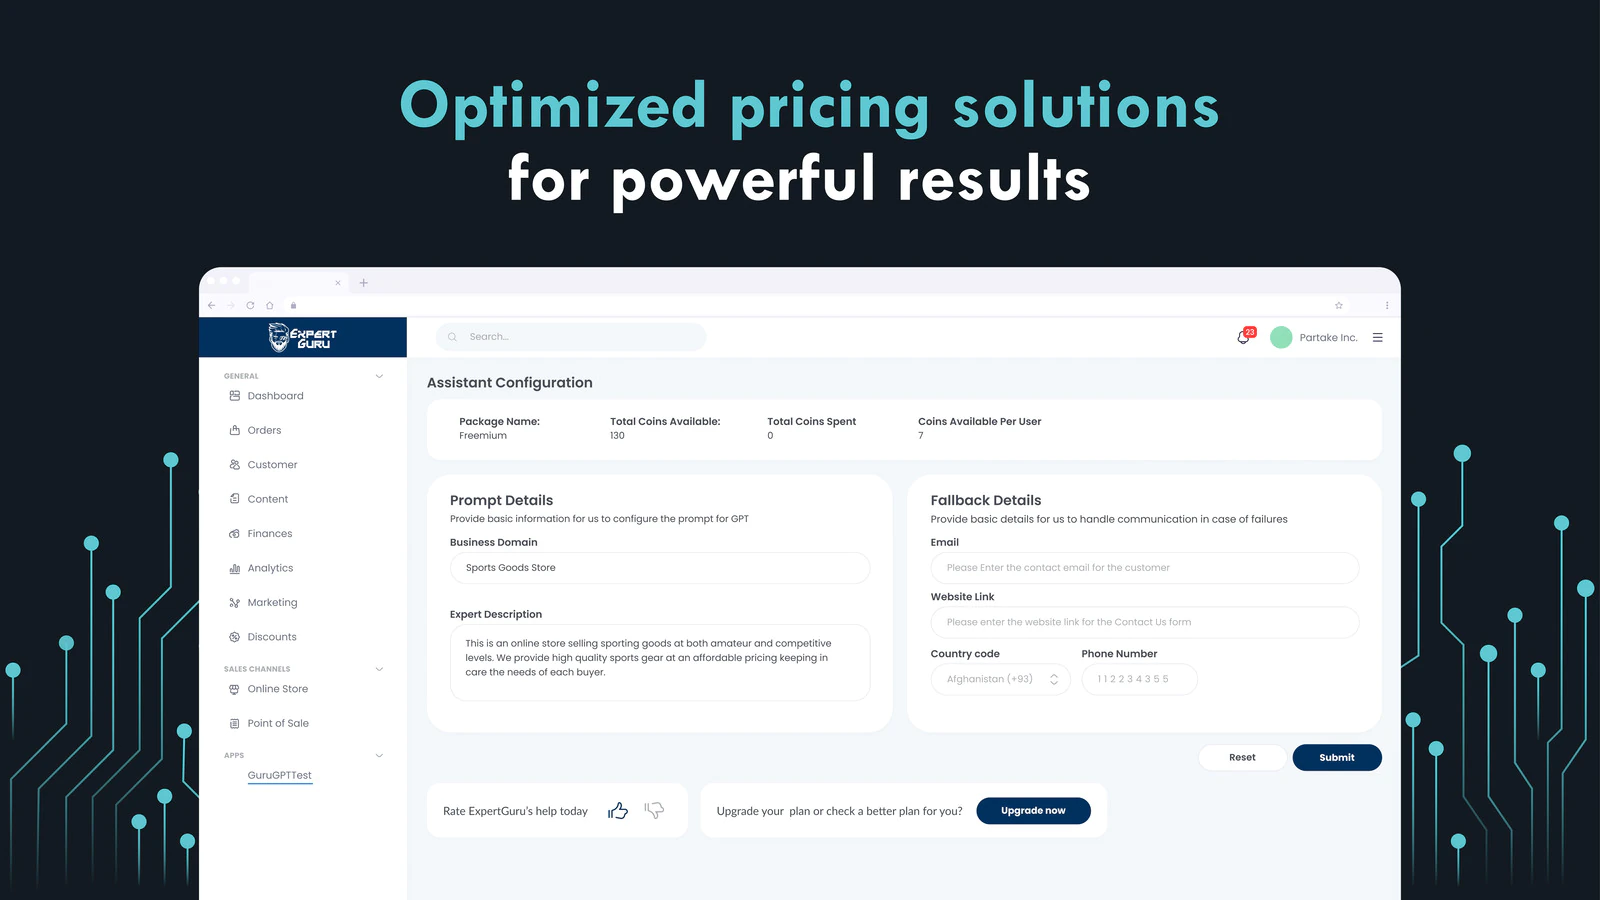 Optimized pricing solutions for powerful results